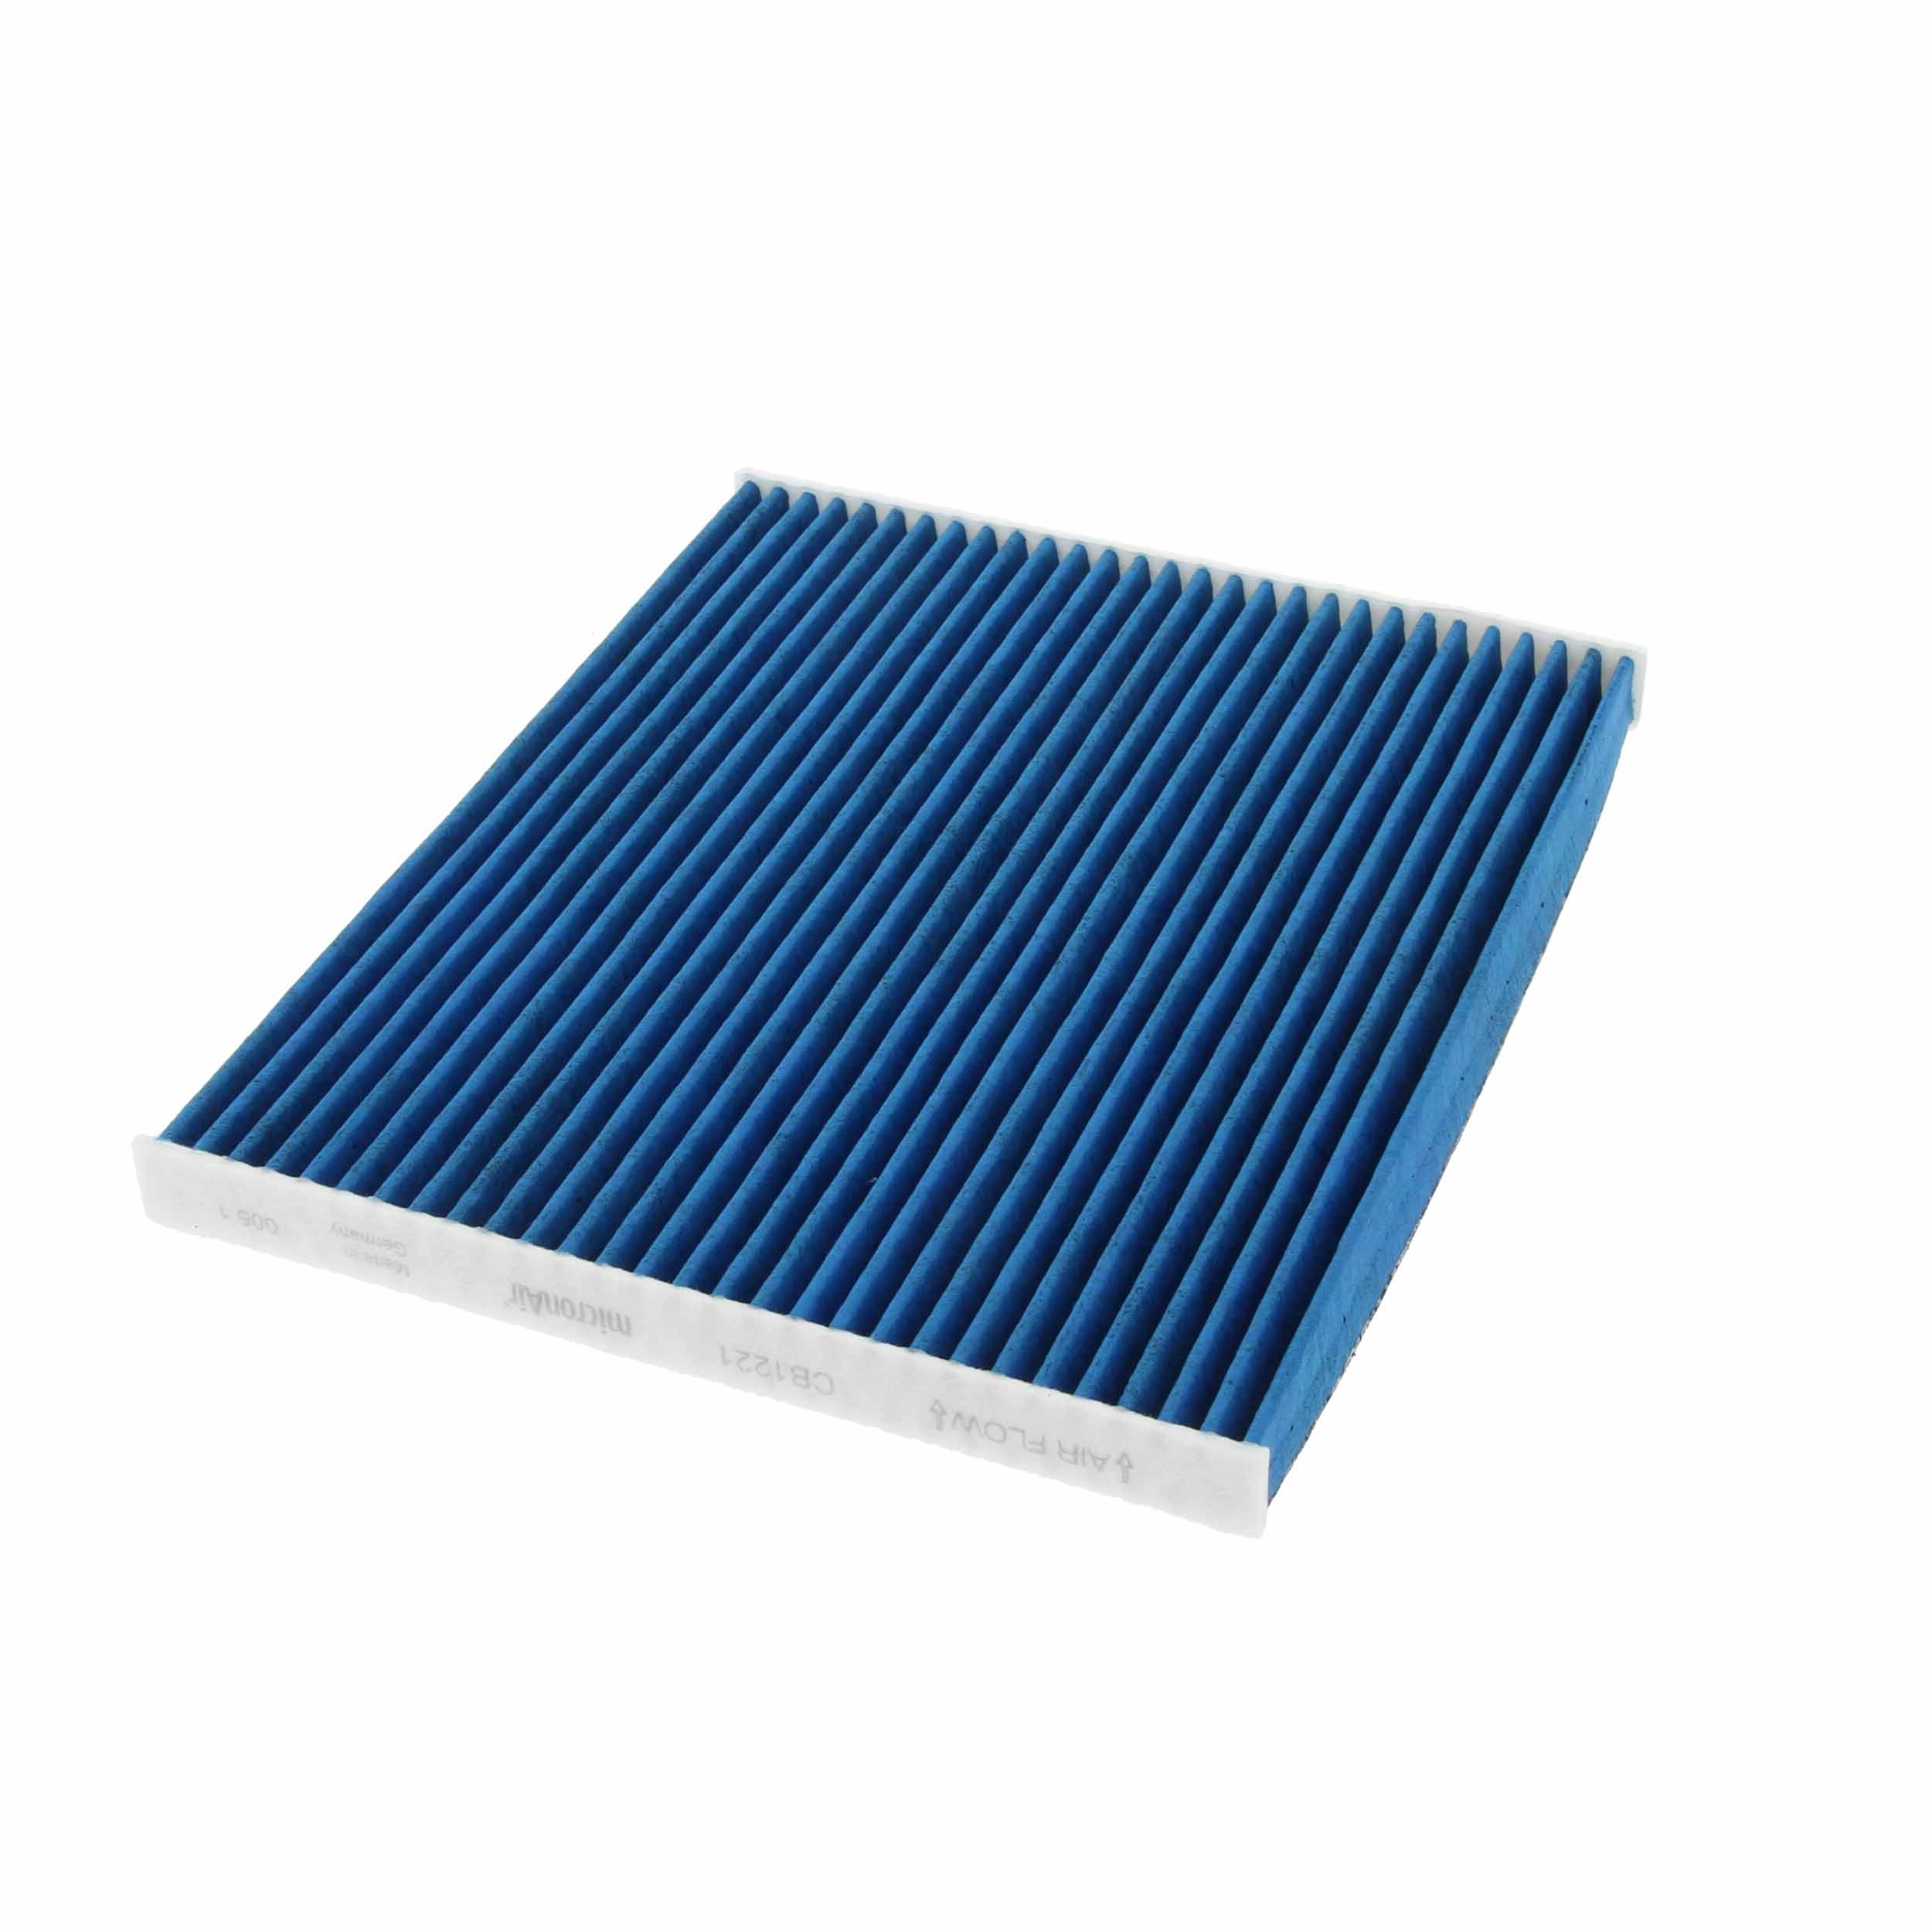 CB1221 CORTECO Particulate filter (PM 2.5), with anti-allergic effect, with antibacterial action, with fungicidal effect, 215 mm x 265 mm x 21 mm Width: 265mm, Height: 21mm, Length: 215mm Cabin filter 49408482 buy